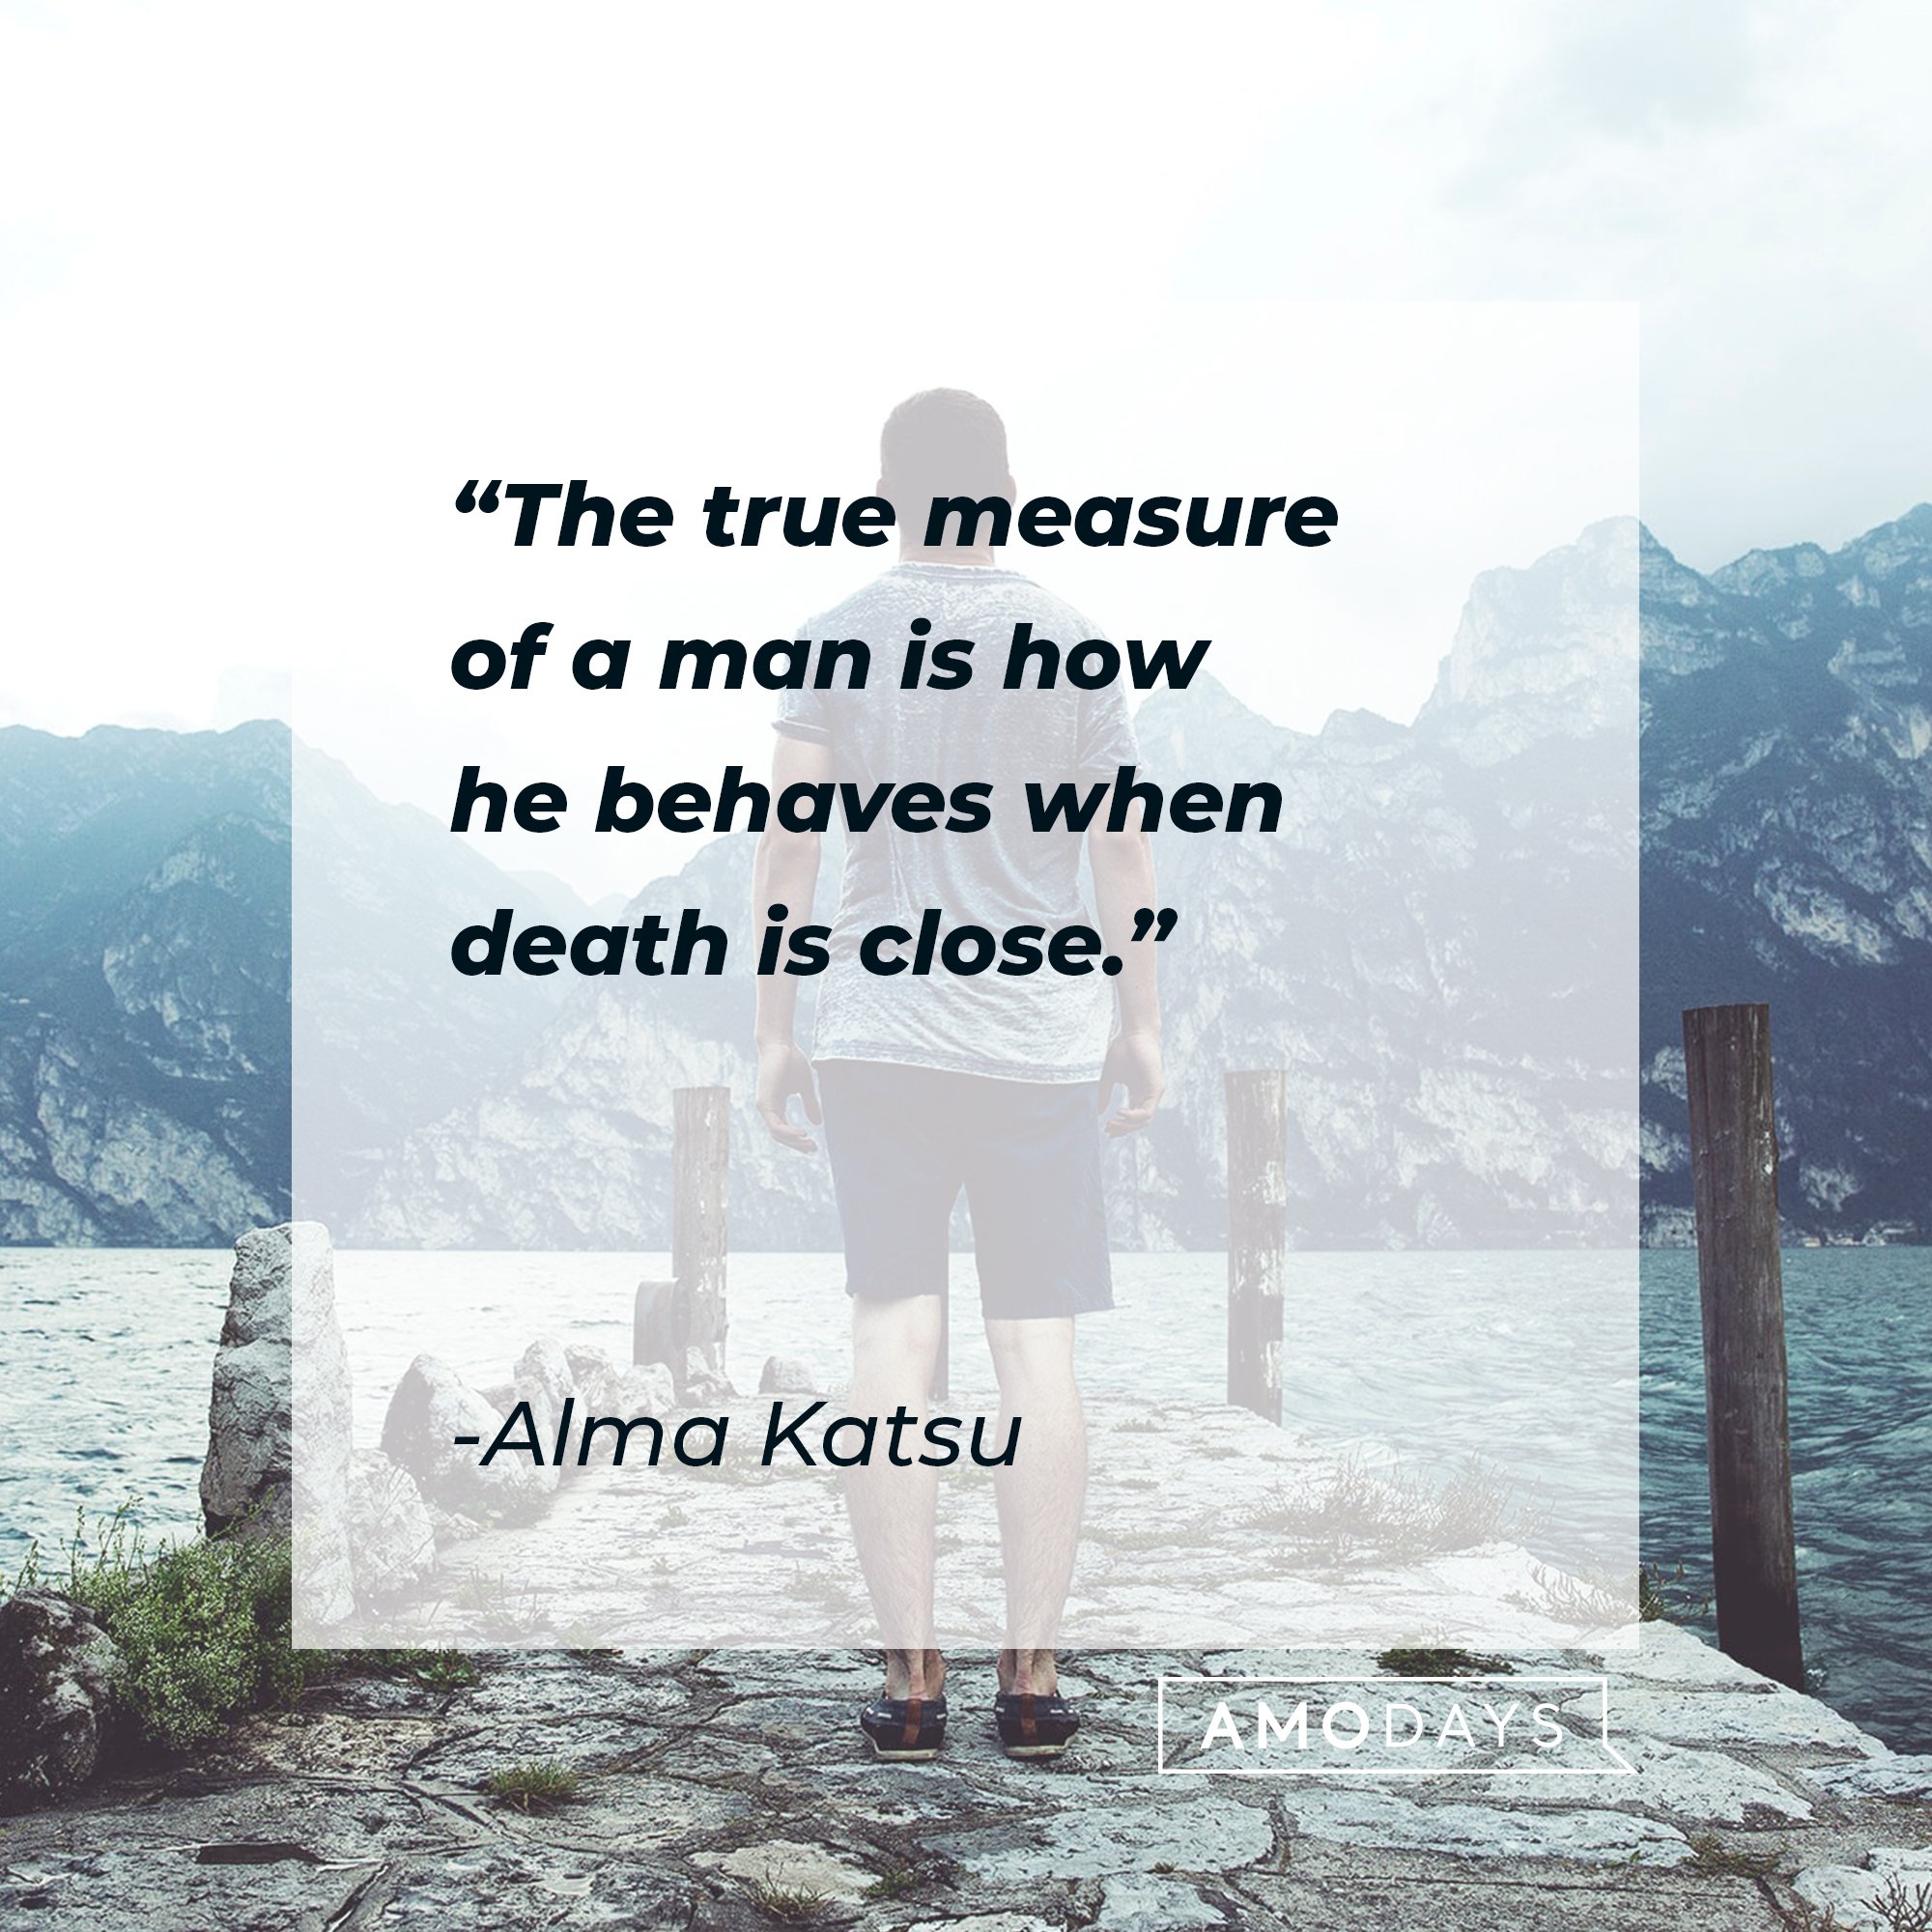  Alma Katsu’s quote: "The true measure of a man is how he behaves when death is close." | Image: AmoDays